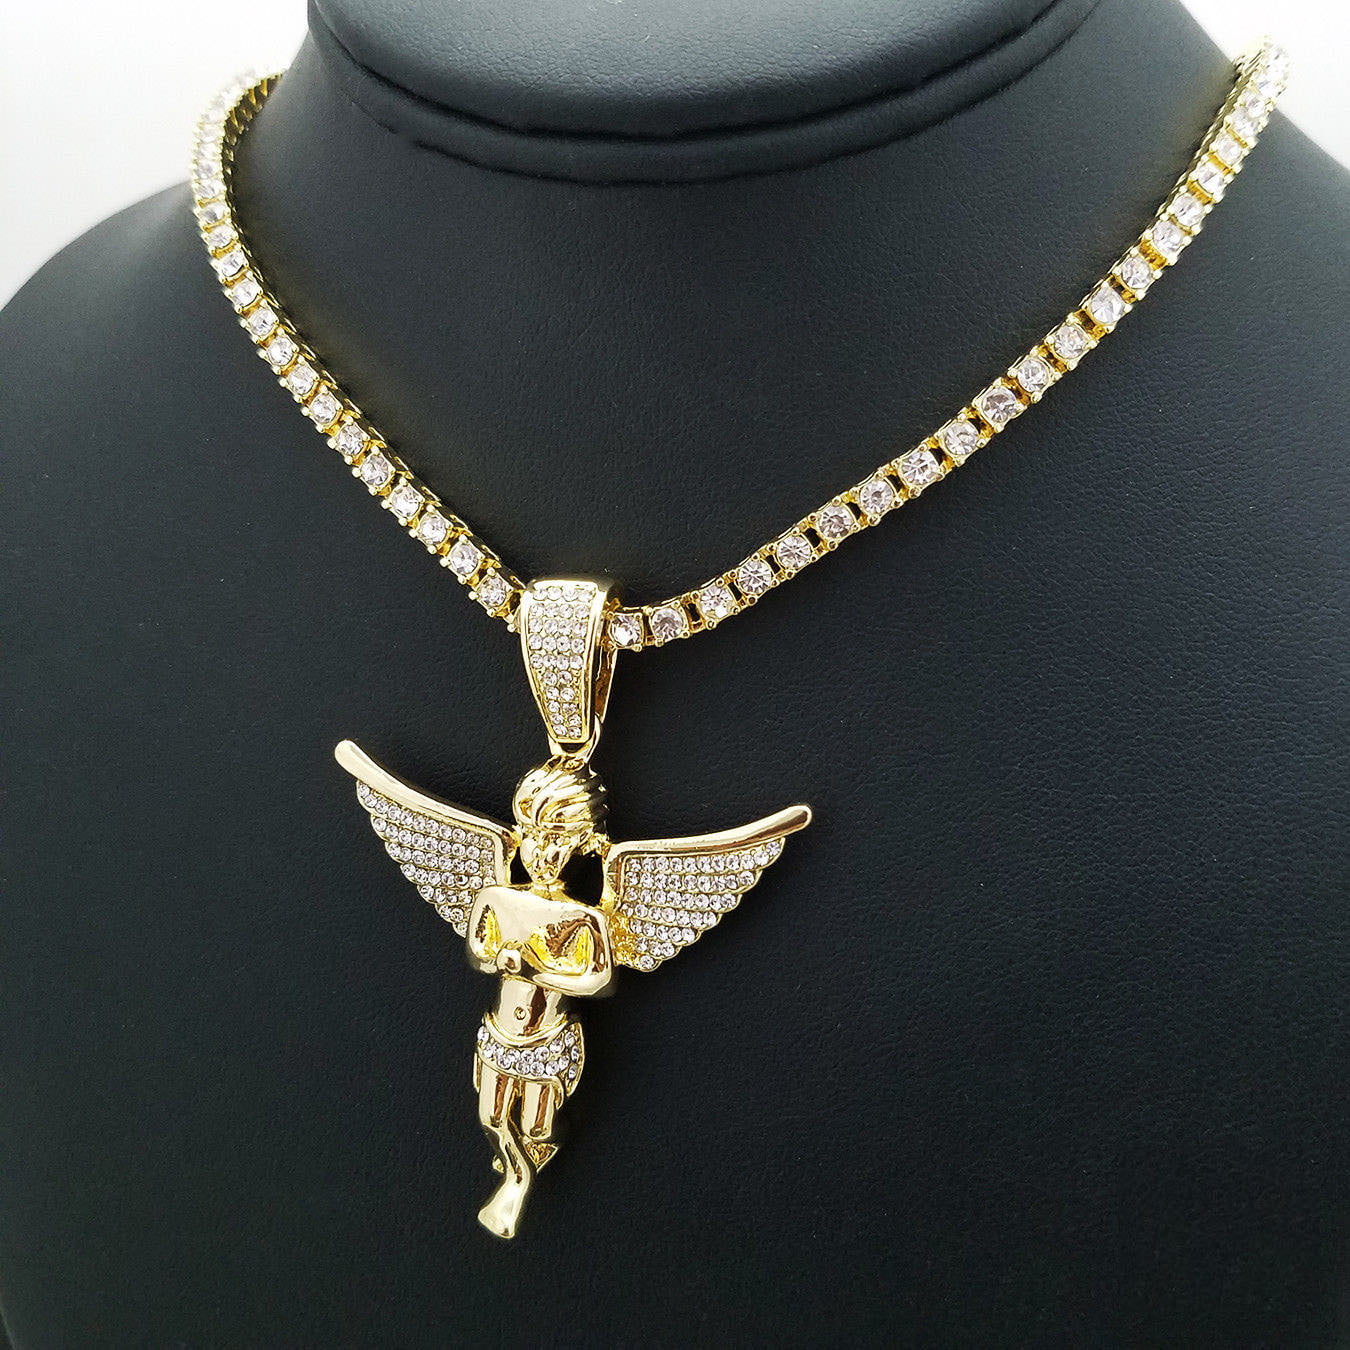 Yellow Gold-Tone Iced Out Hip Hop Bling Symbol Of Life Ankh Cross Pendant 1 Row Square Cubic Zirconia Princess Cut Stones Tennis Chain 18 Necklace Choker Chain